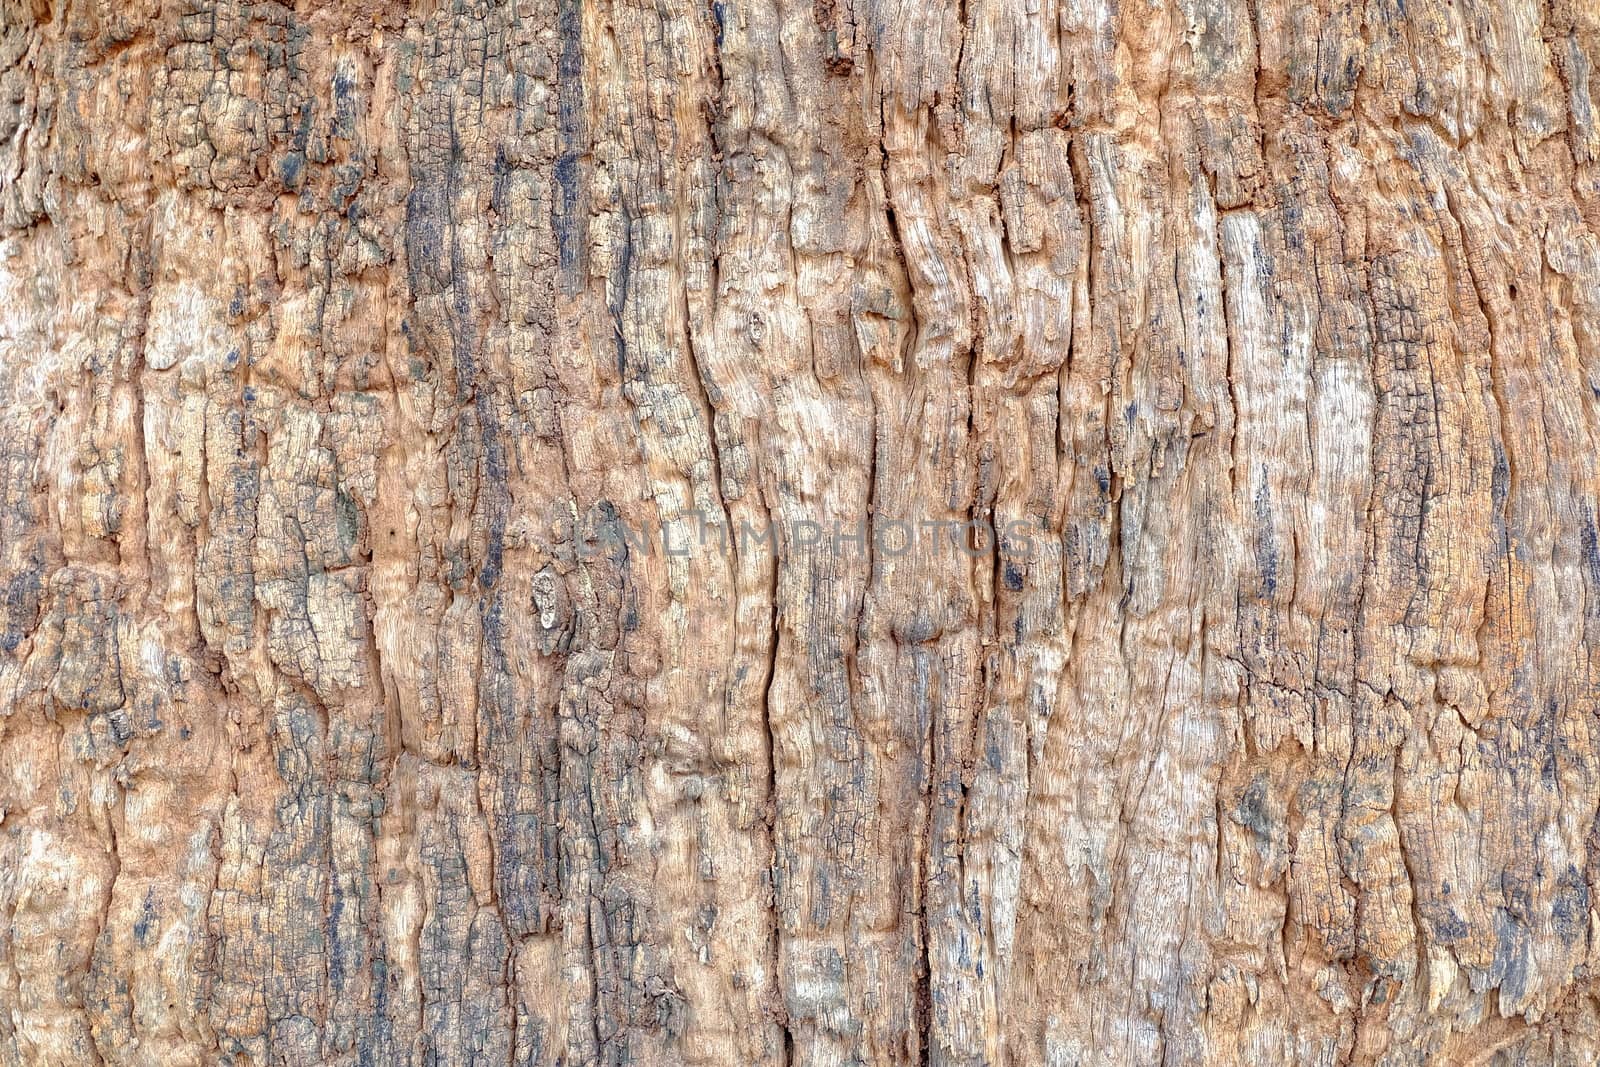 Bark Texture Background. by mesamong